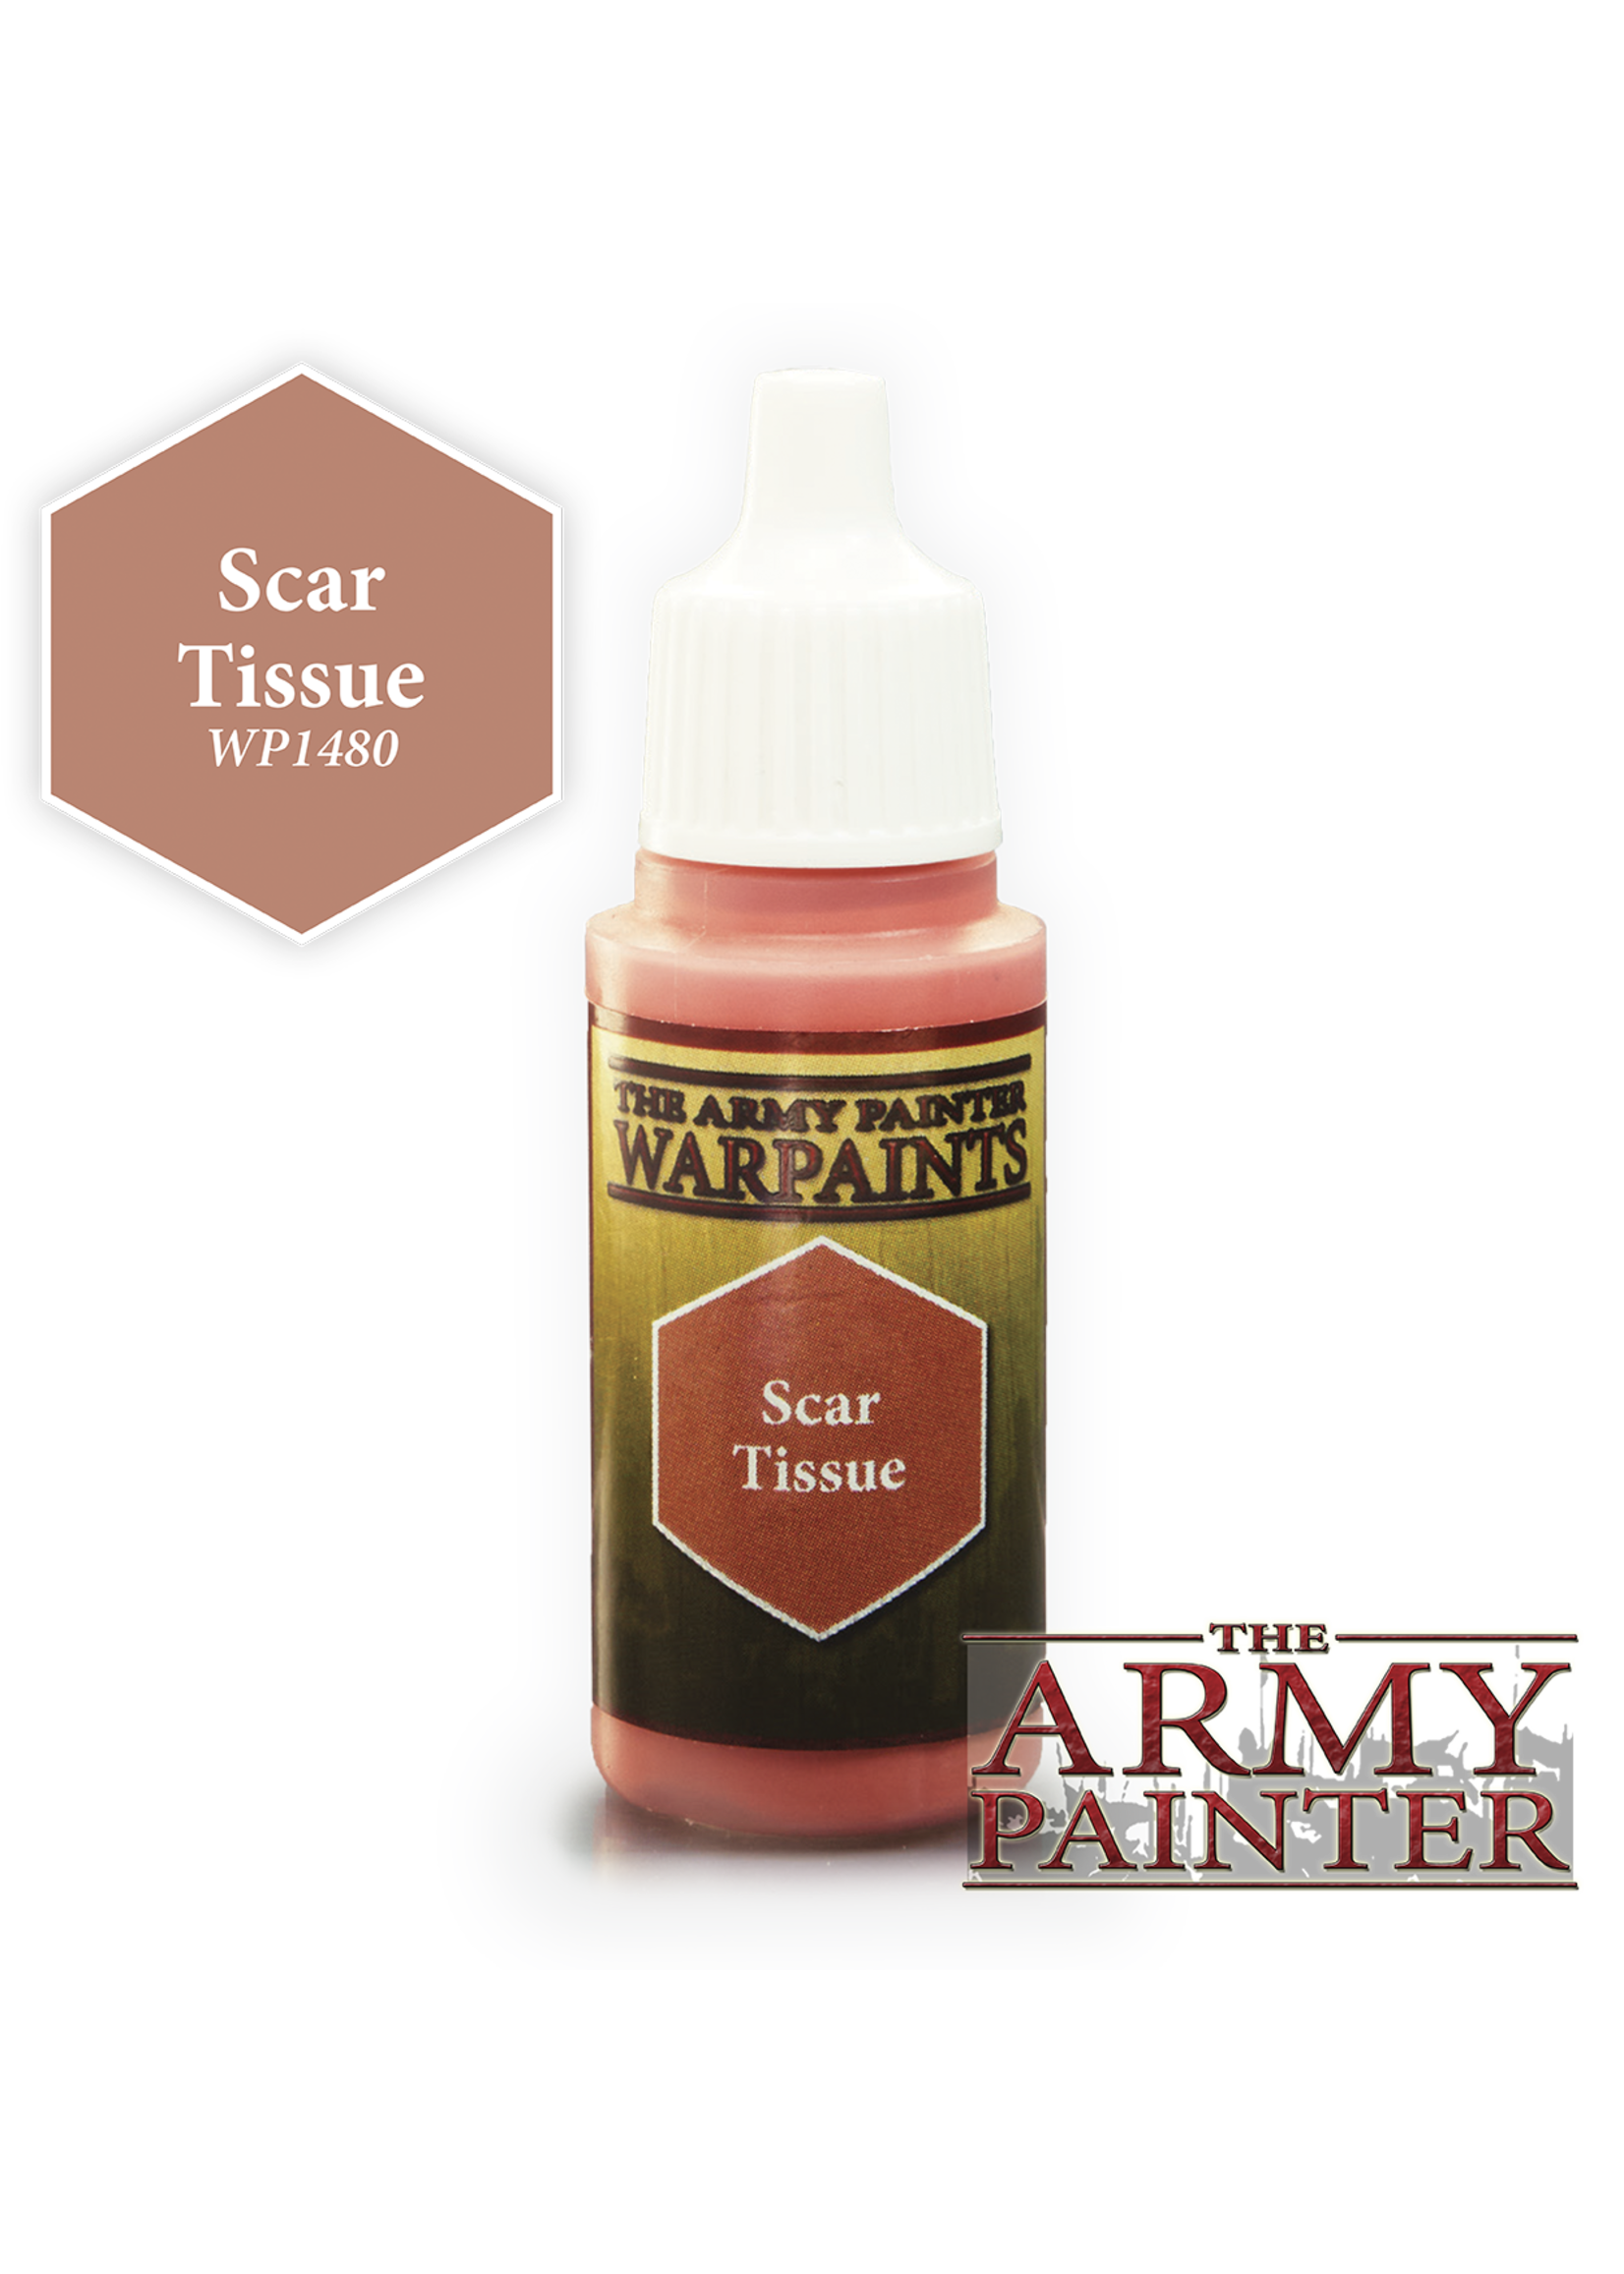 The Army Painter Acrylics Warpaints Scar Tissue